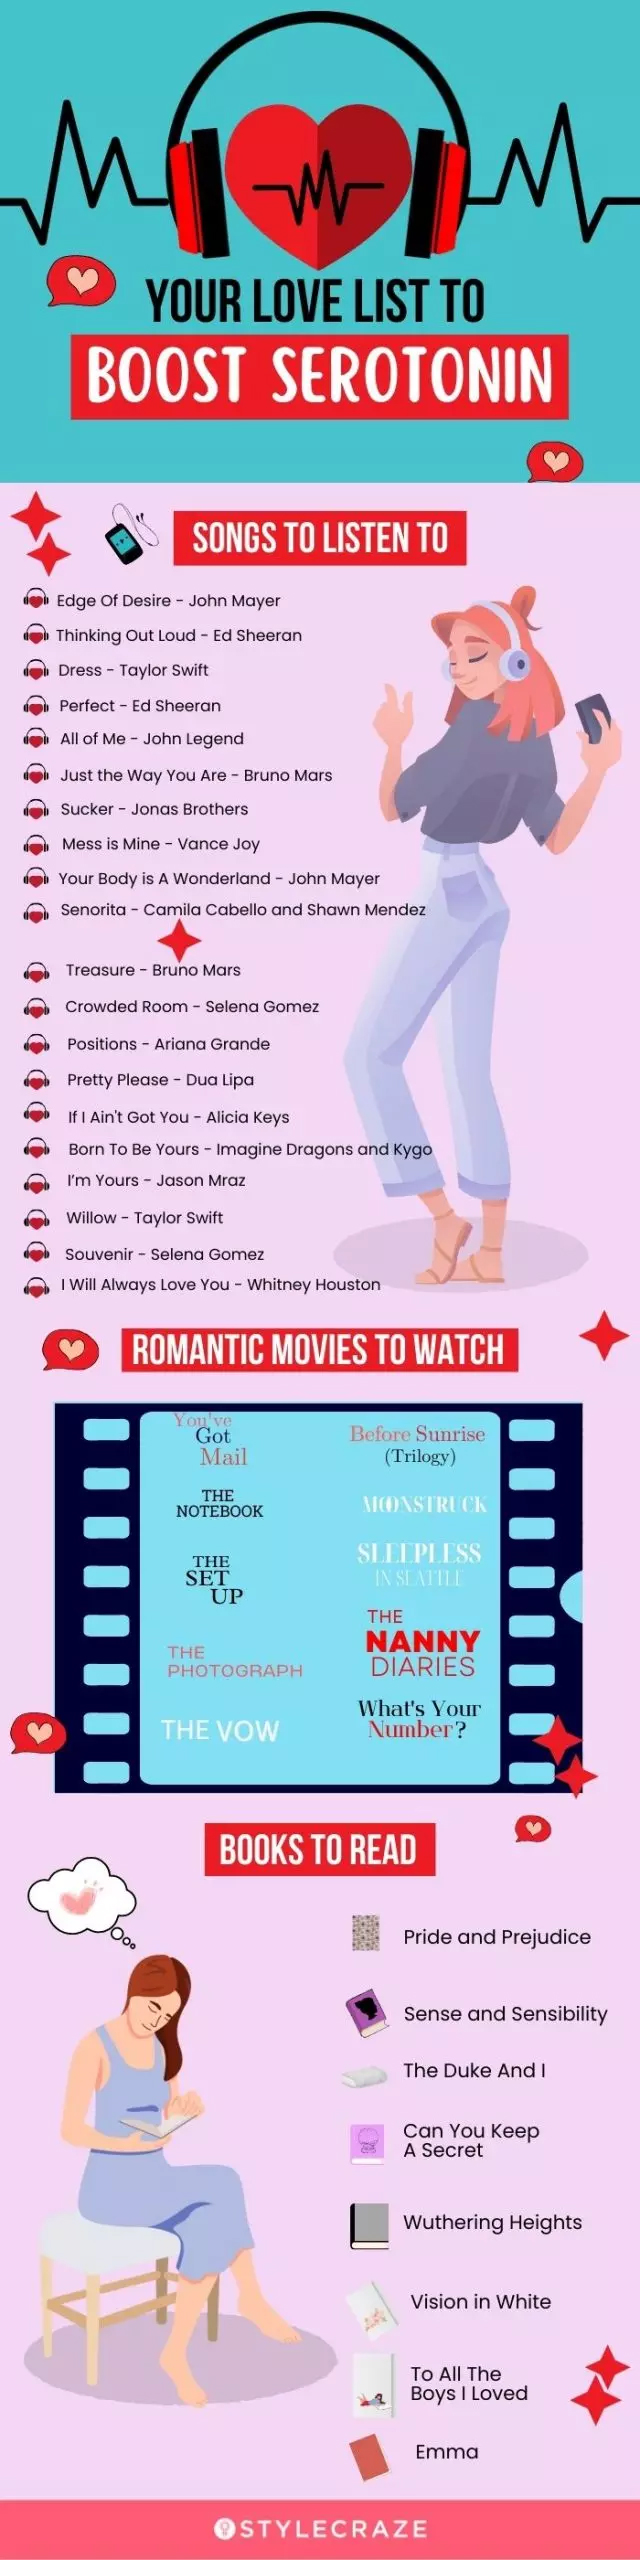 your love list to boost serotonin (infographic)